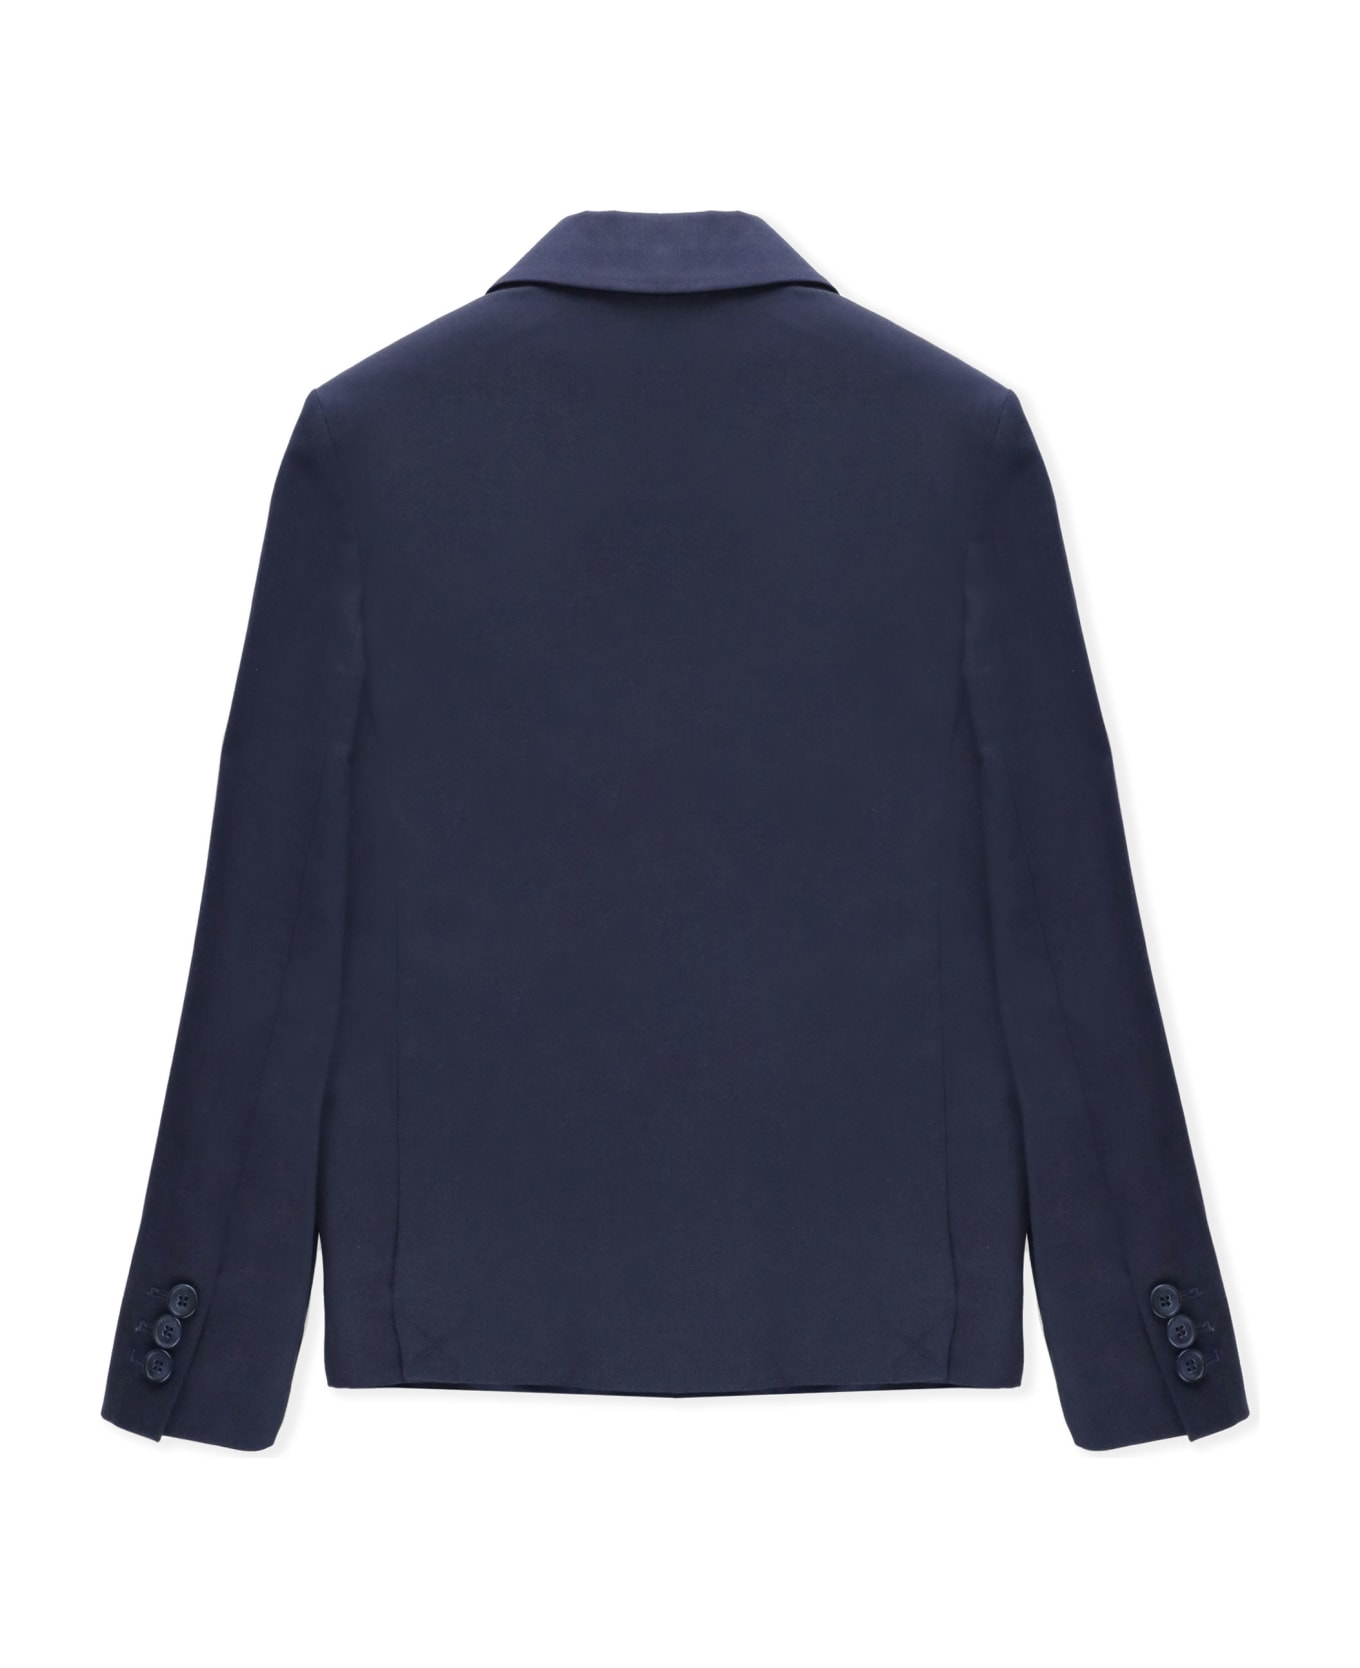 Fay Double-breasted Cotton Jacket - Blue